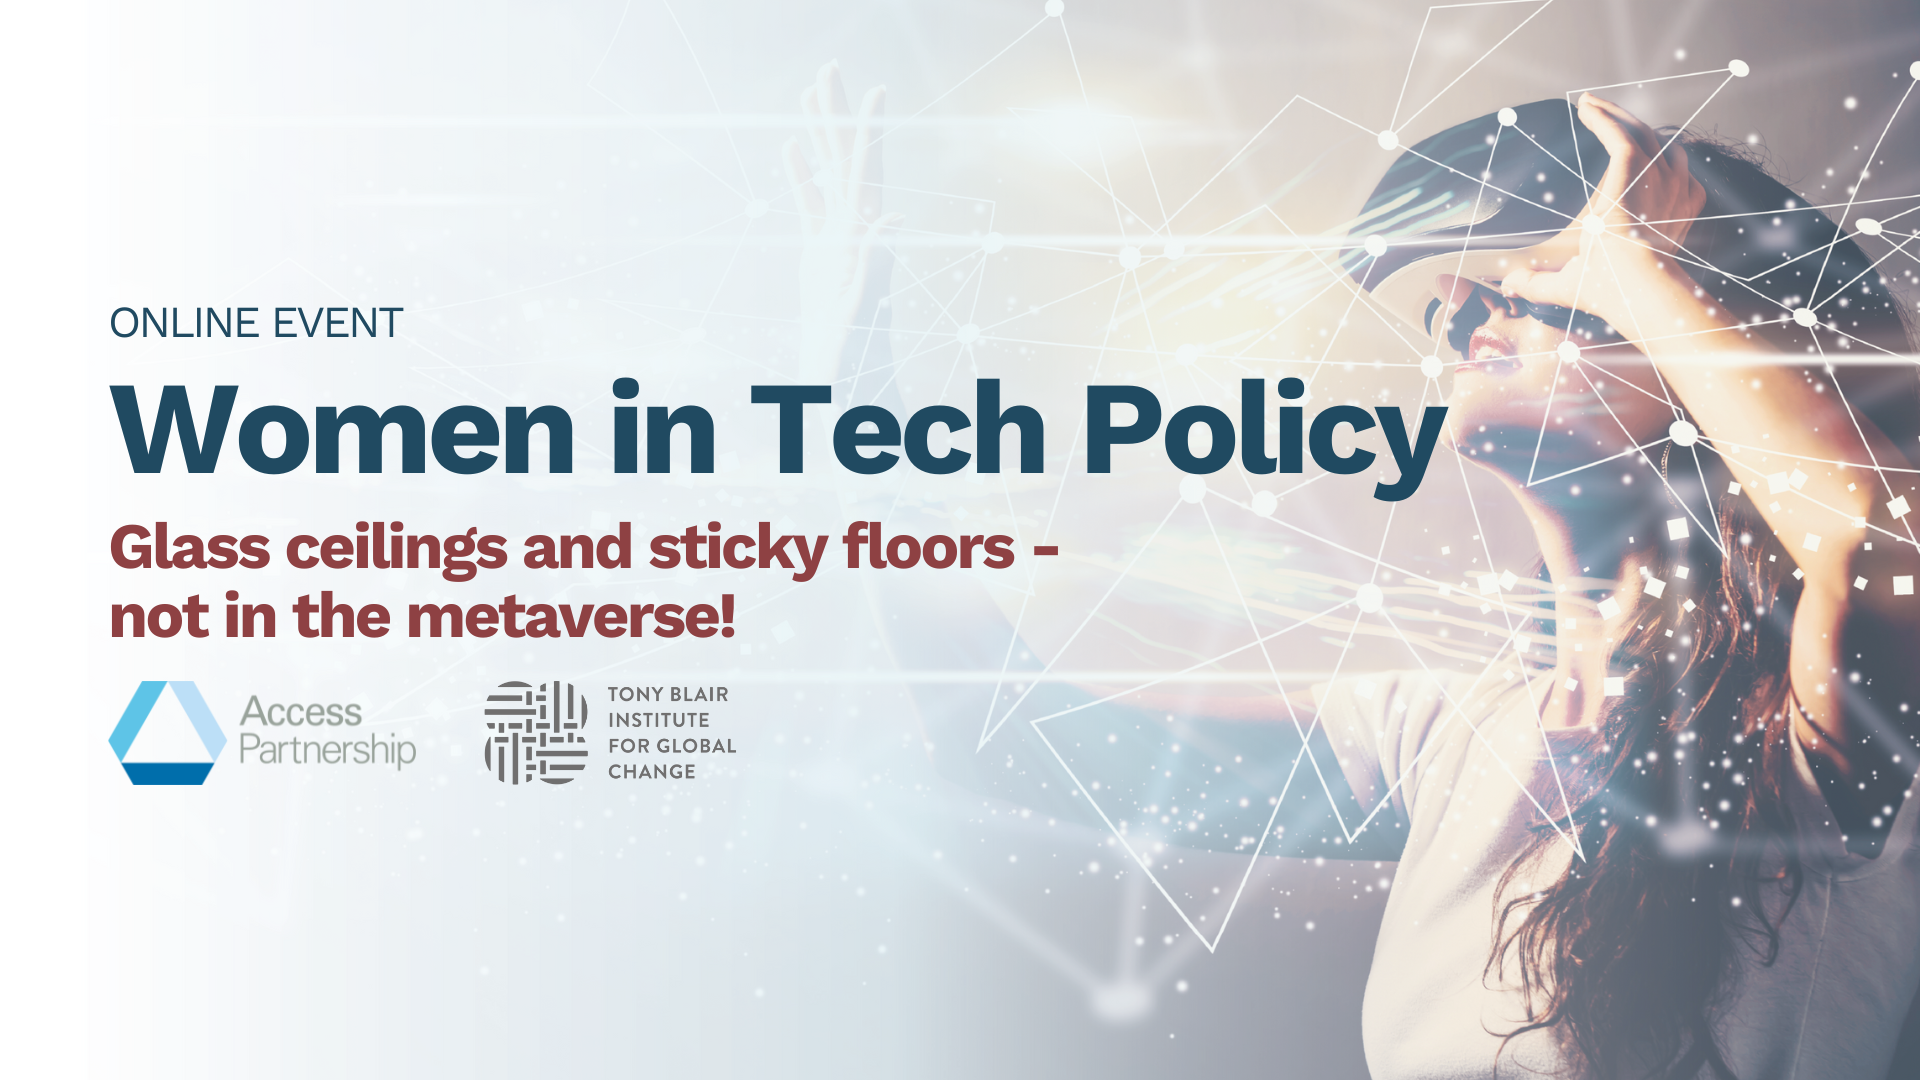 Women in Tech Policy: Glass ceilings and sticky floors – not in the metaverse!